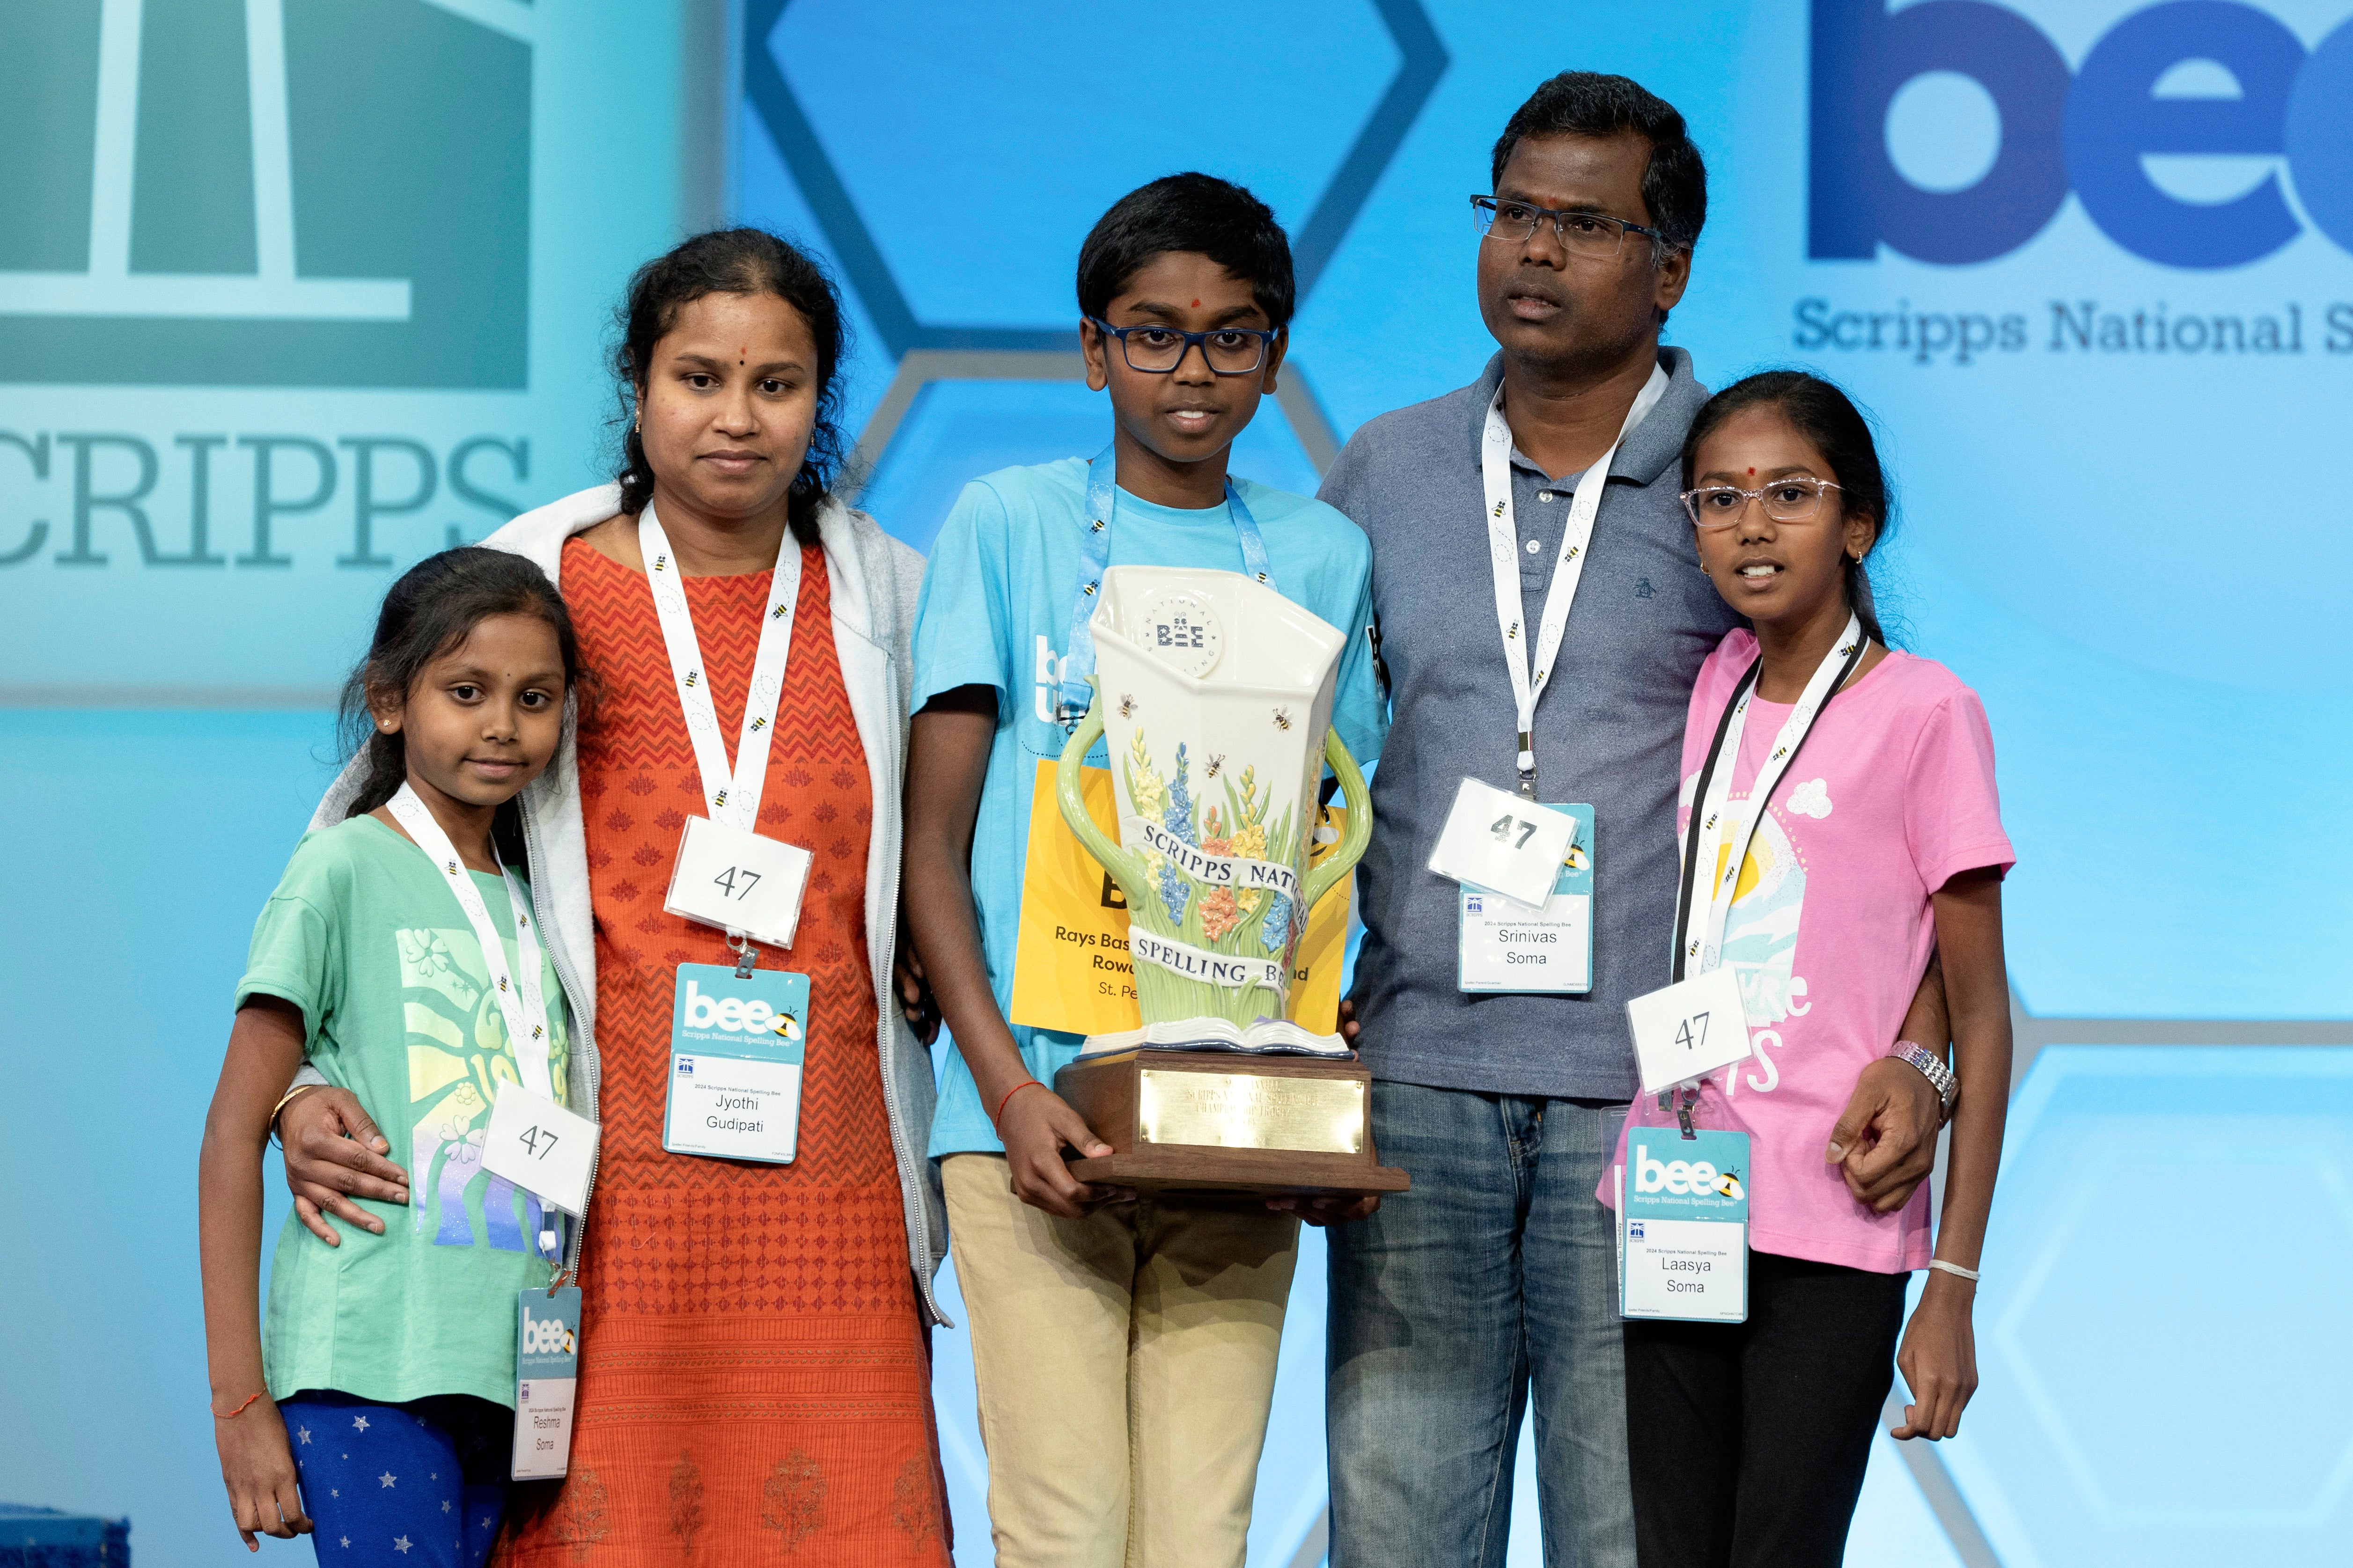 Bruhat with his family after winning the Scripps National Spelling Bee